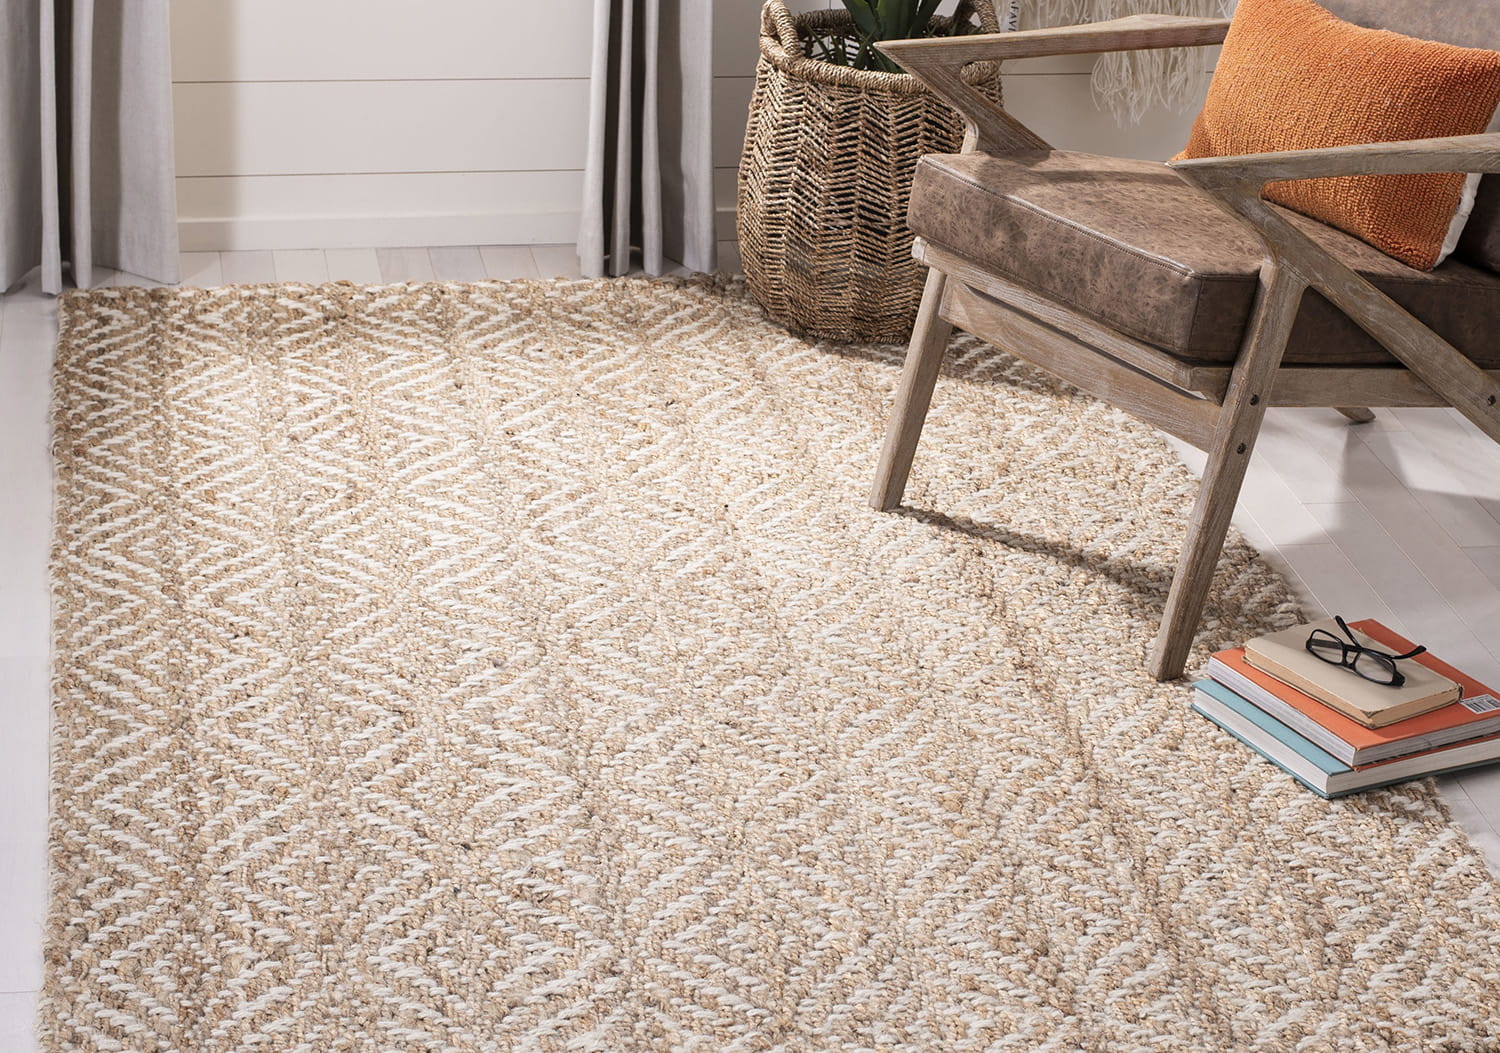 Why sisal carpets are the best choice for your floors?